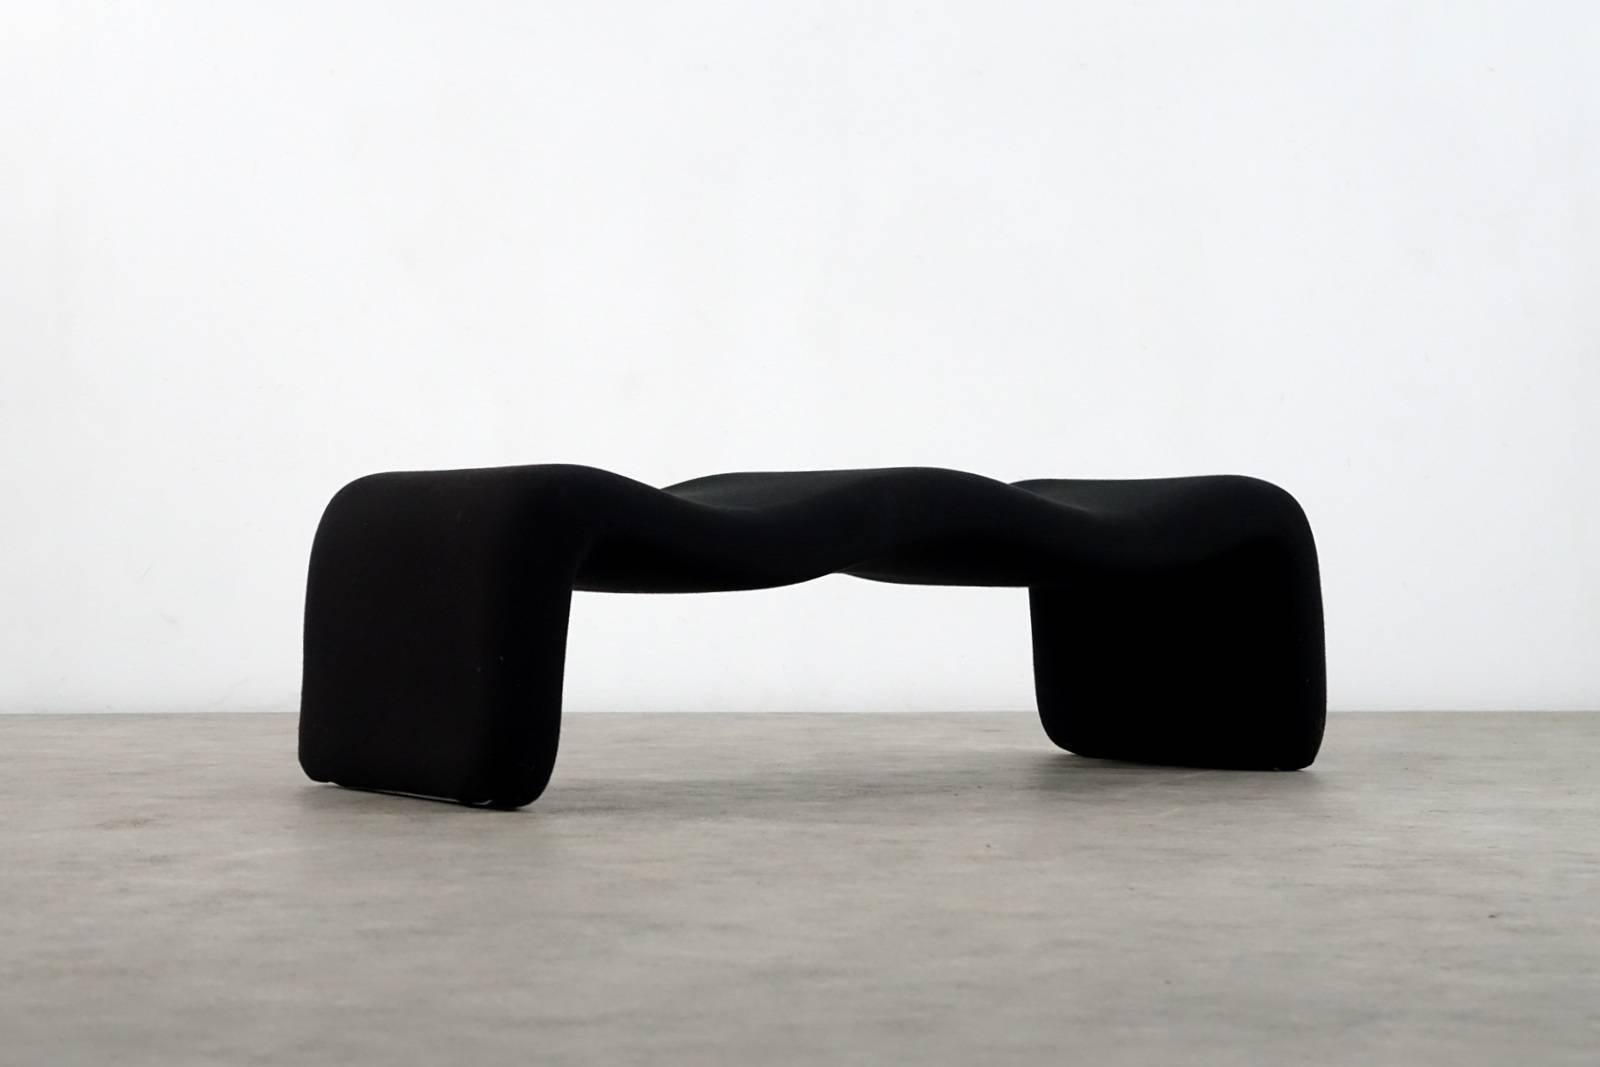 Mid-20th Century Olivier Mourgue Djinn Bench Made by Airborne, France circa 1963